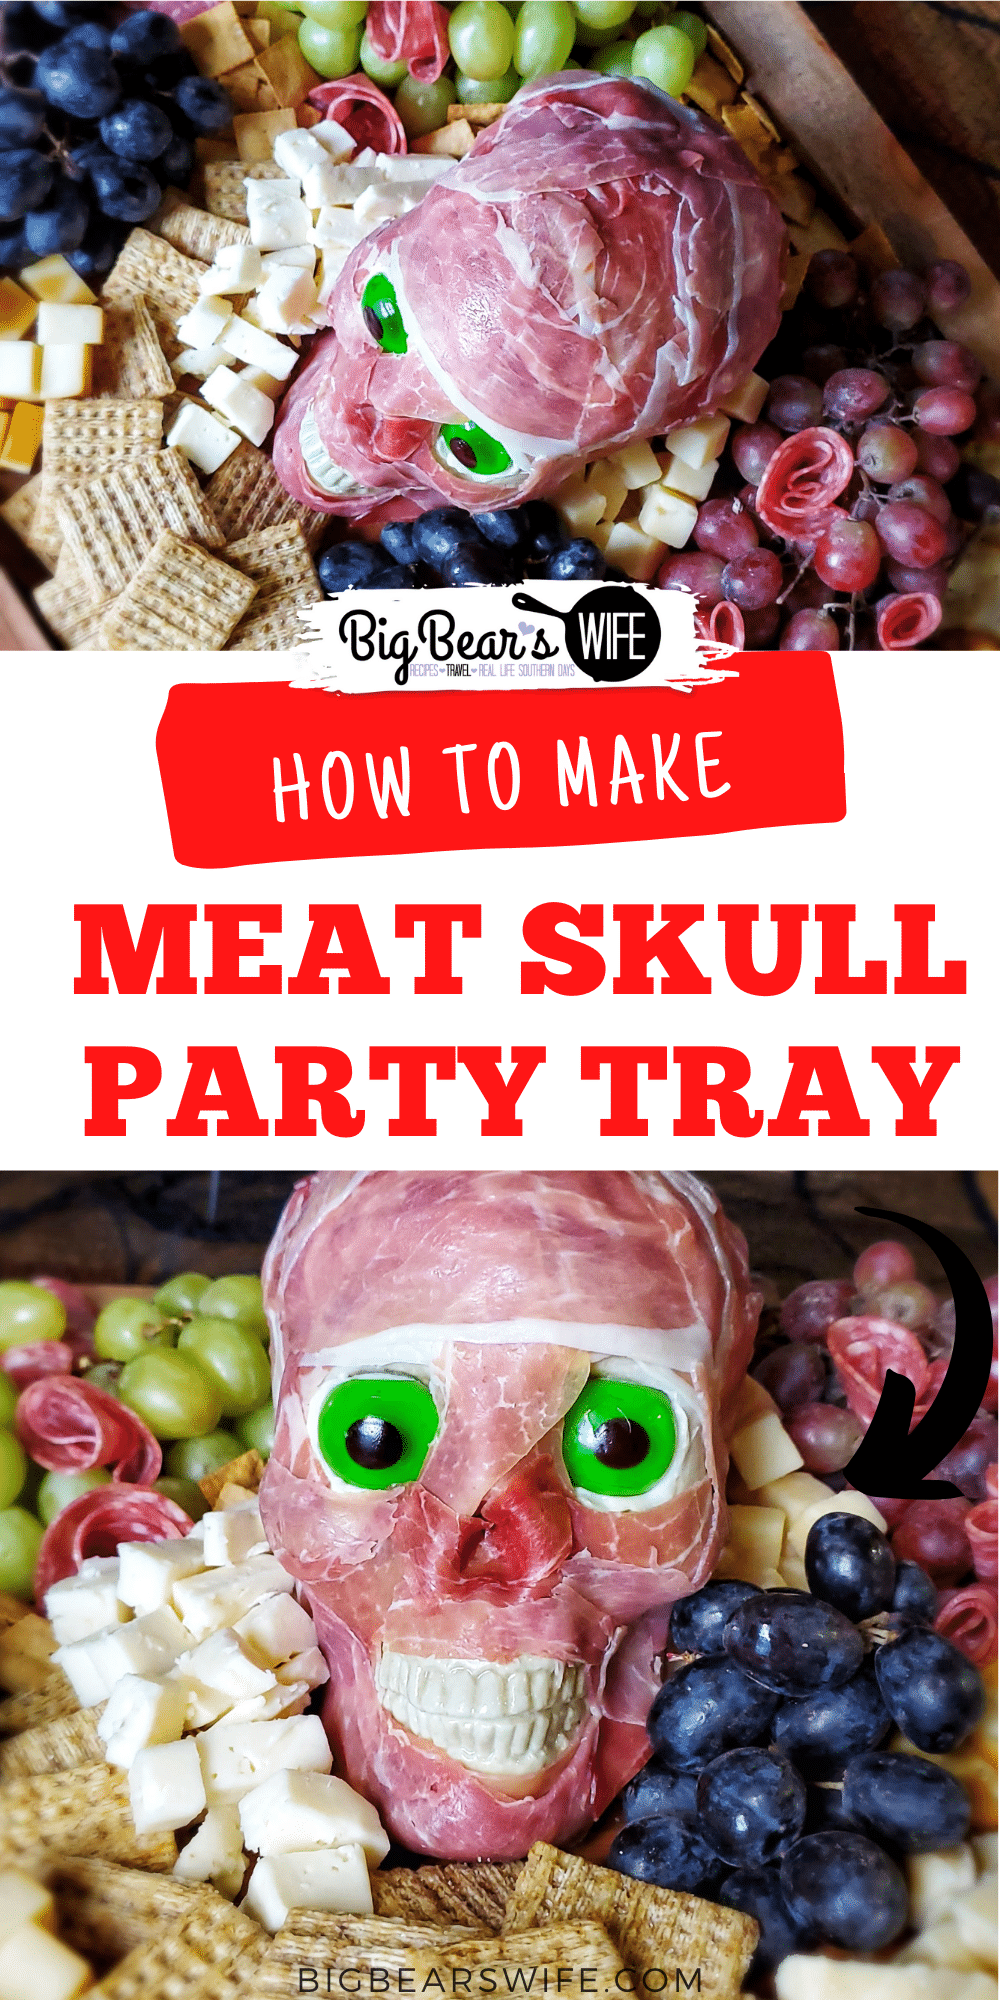 Easy Meat Skull Party Tray - a Halloween charcuterie board with a scary skull covered in prosciutto, surrounded by grapes, cheese and salami is the perfect board for Halloween! via @bigbearswife